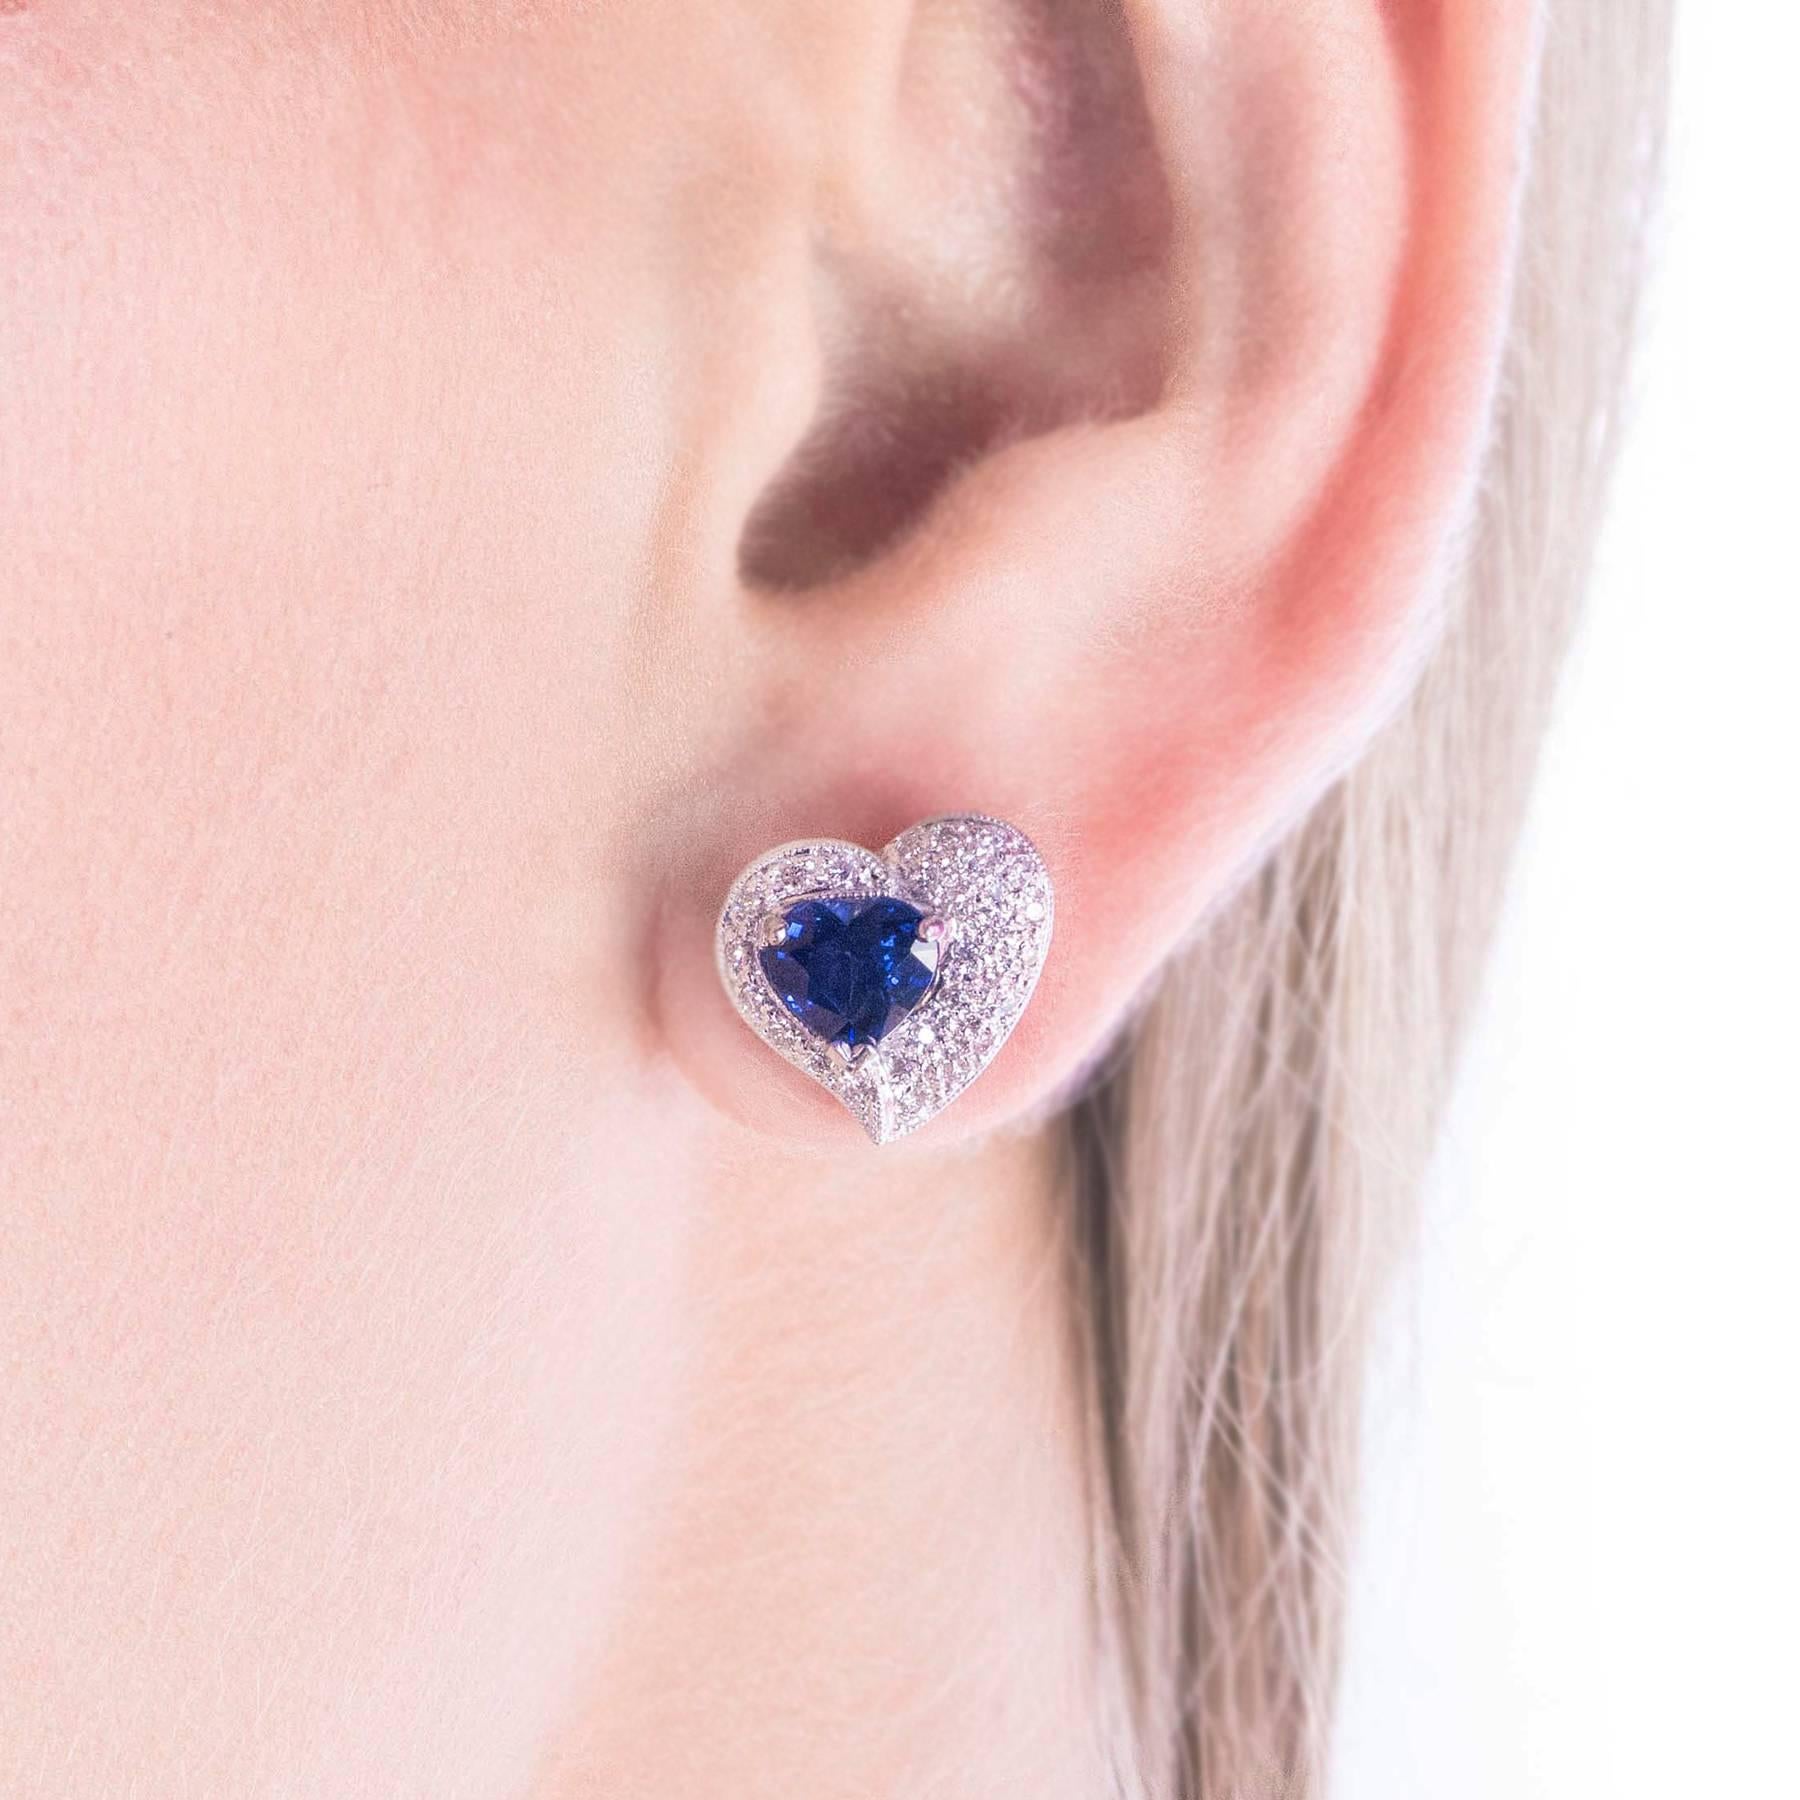 A stunning pair of 18 Karat White Gold Earrings are set with Heart Shaped natural Blue Sapphires surrounded by round, Brilliant Cut Diamonds.

These earrings will suit a lady who likes fabulous earrings on the smaller side.

CONDITION:  In overall